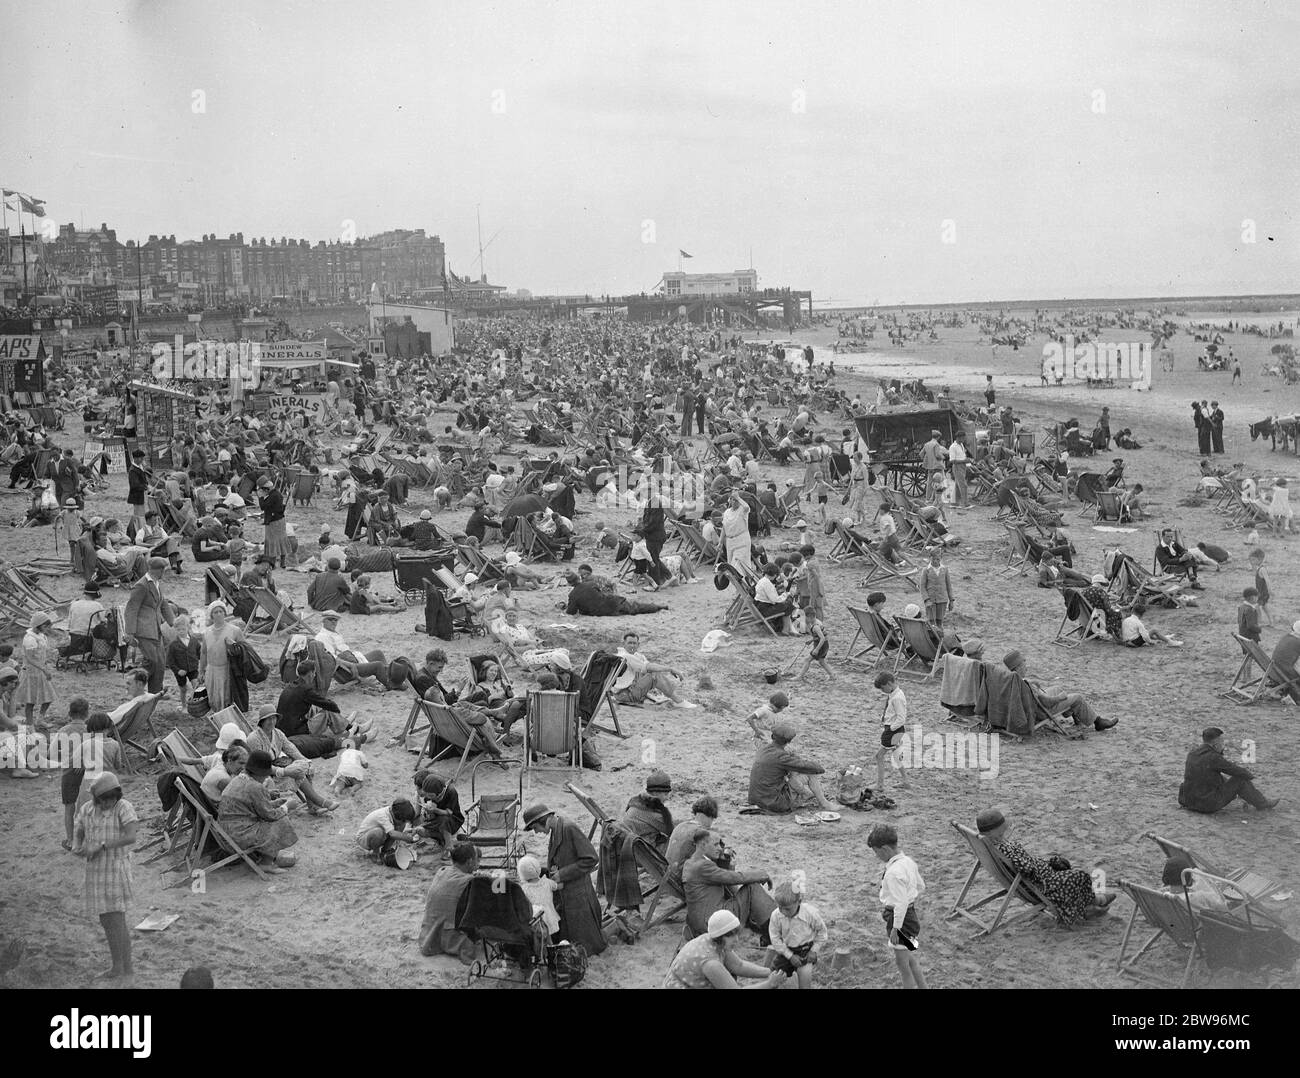 Enprmous crowds at Margate for August holiday . An enormous crowd spent the August holiday on the sands at Margate , Kent . The crowded beach at Margate . 31 July 1932 Stock Photo